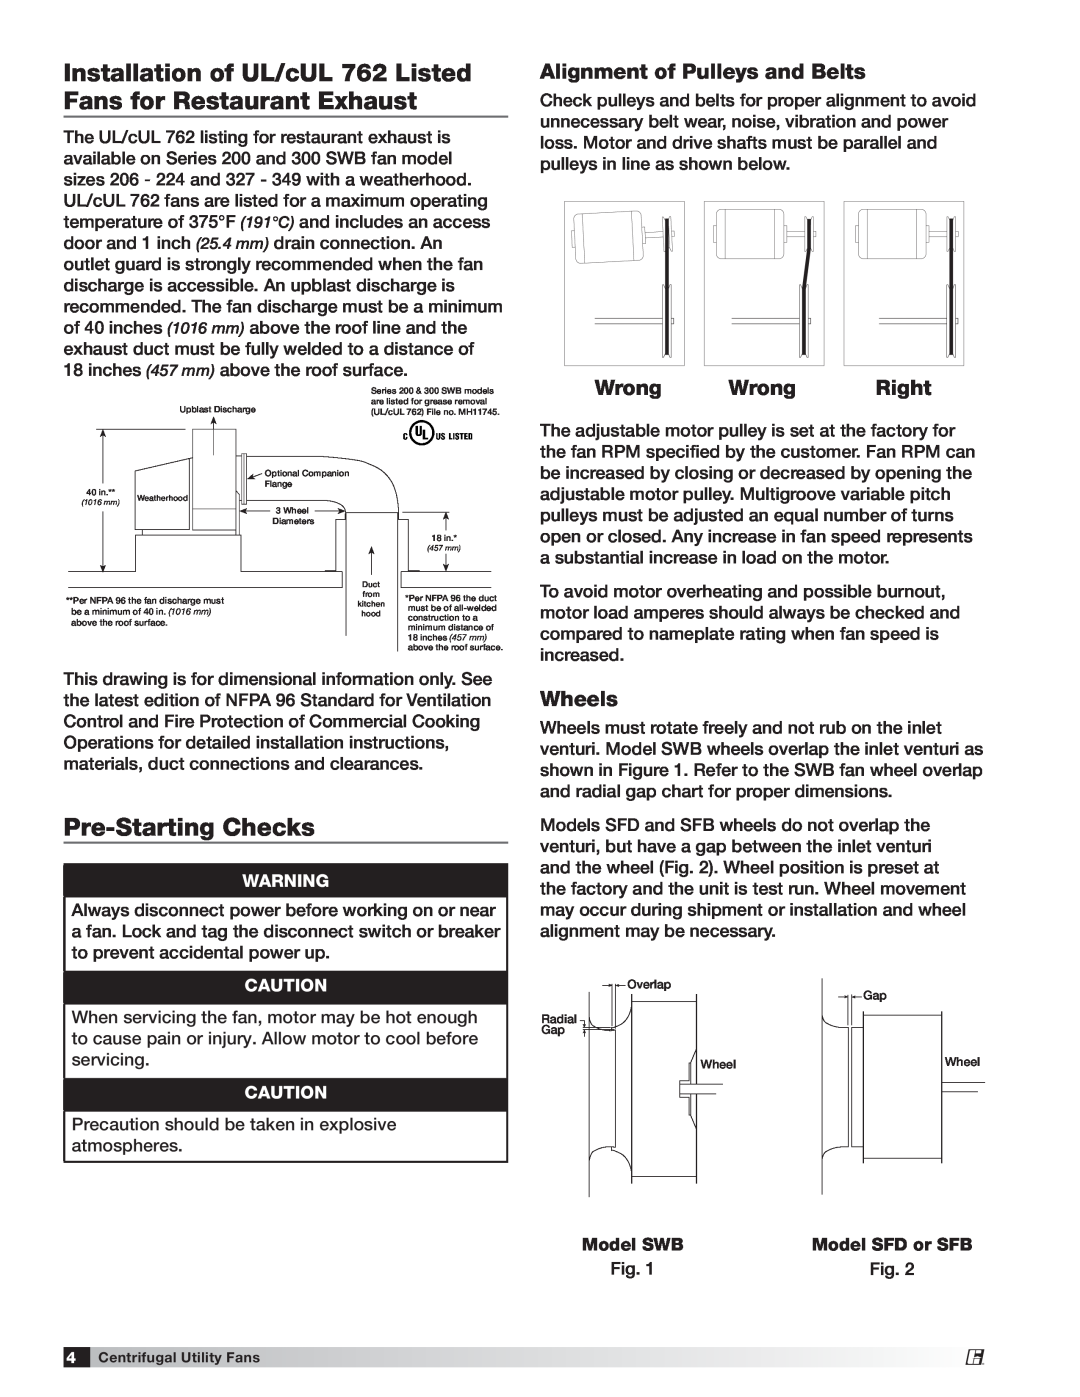 Greenheck Fan manual Pre-StartingChecks, Alignment of Pulleys and Belts, Wrong Wrong Right, Wheels, Model SFD or SFB 